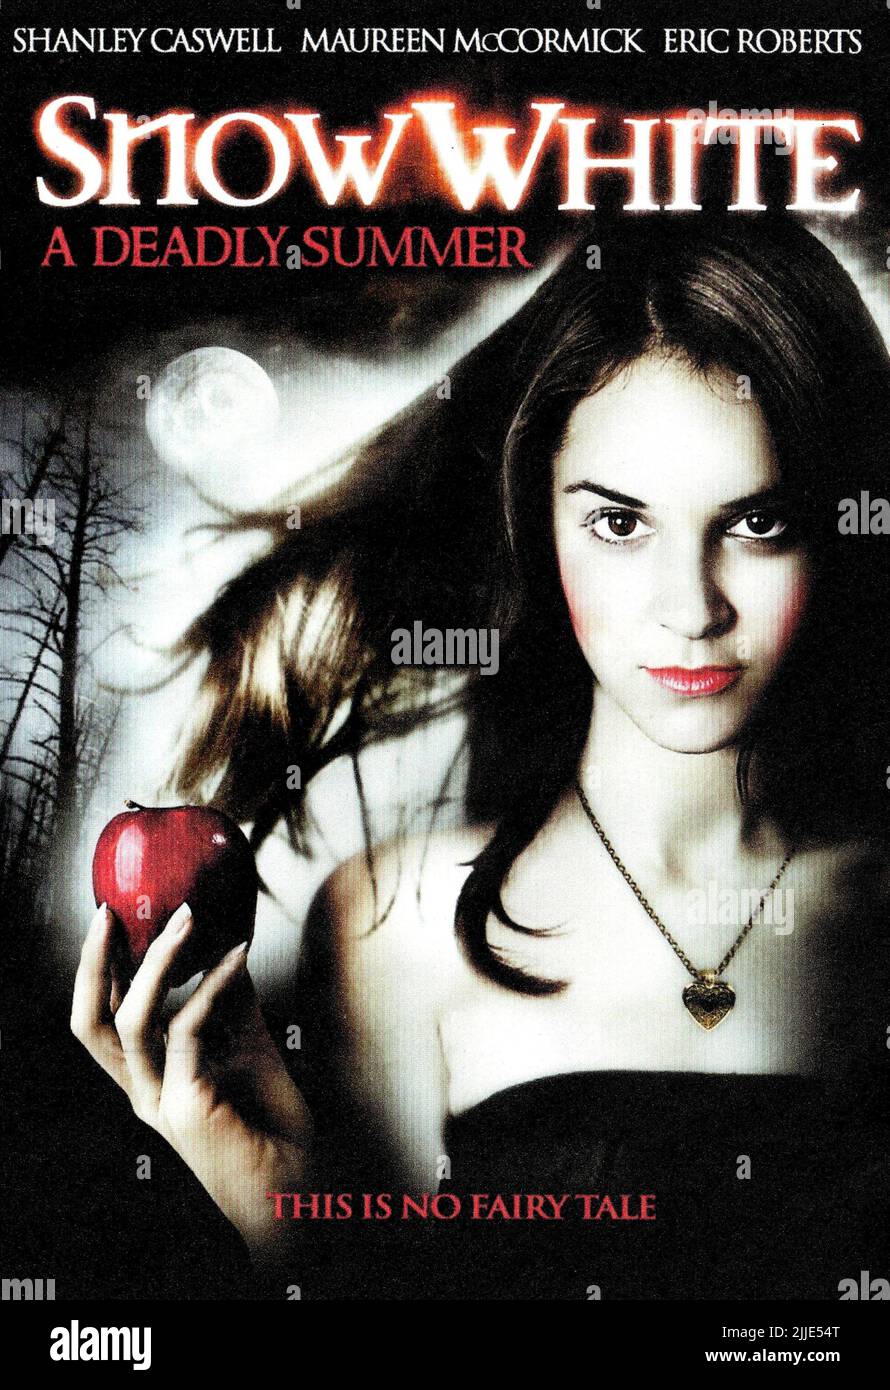 SHANLEY CASWELL POSTER, SNOW WHITE: A DEADLY SUMMER, 2012 Stock Photo